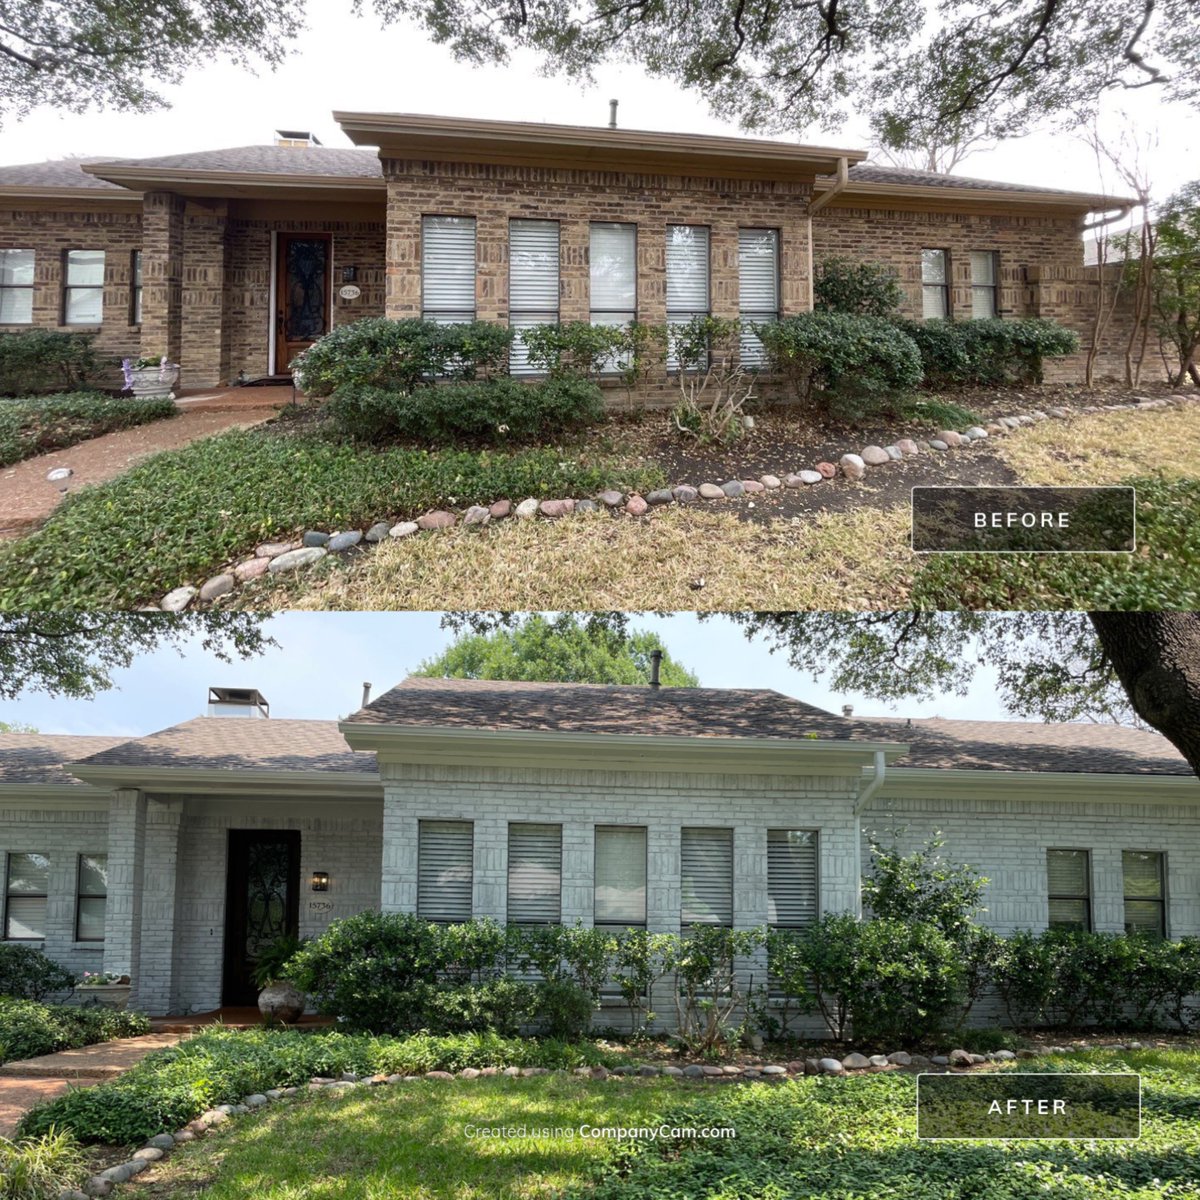 Happy Monday! What better way to start off than some Fresh Paint! Check out this beautiful transformation! 

#exteriorhousepainting #sherwinwilliamspaint #exteriorpaintingcontractor #housepaint #dfwcontractor